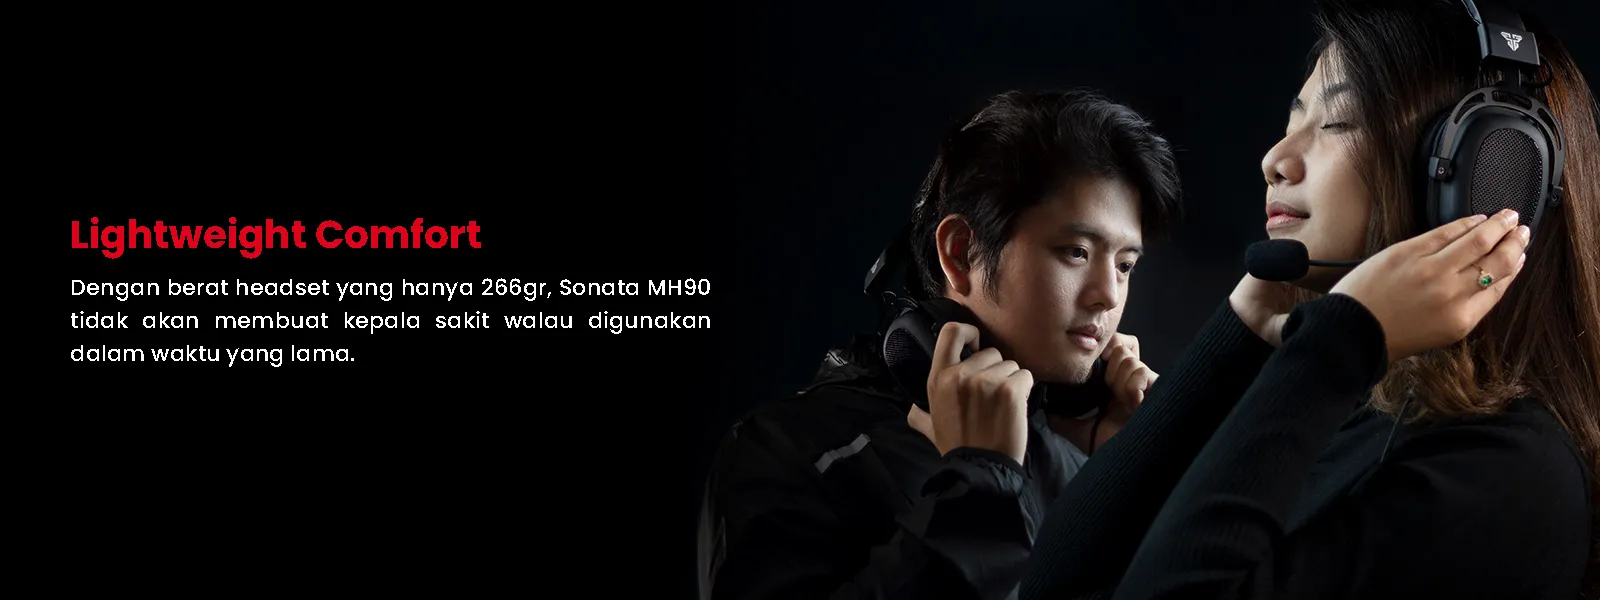 Headset Gaming Mh90